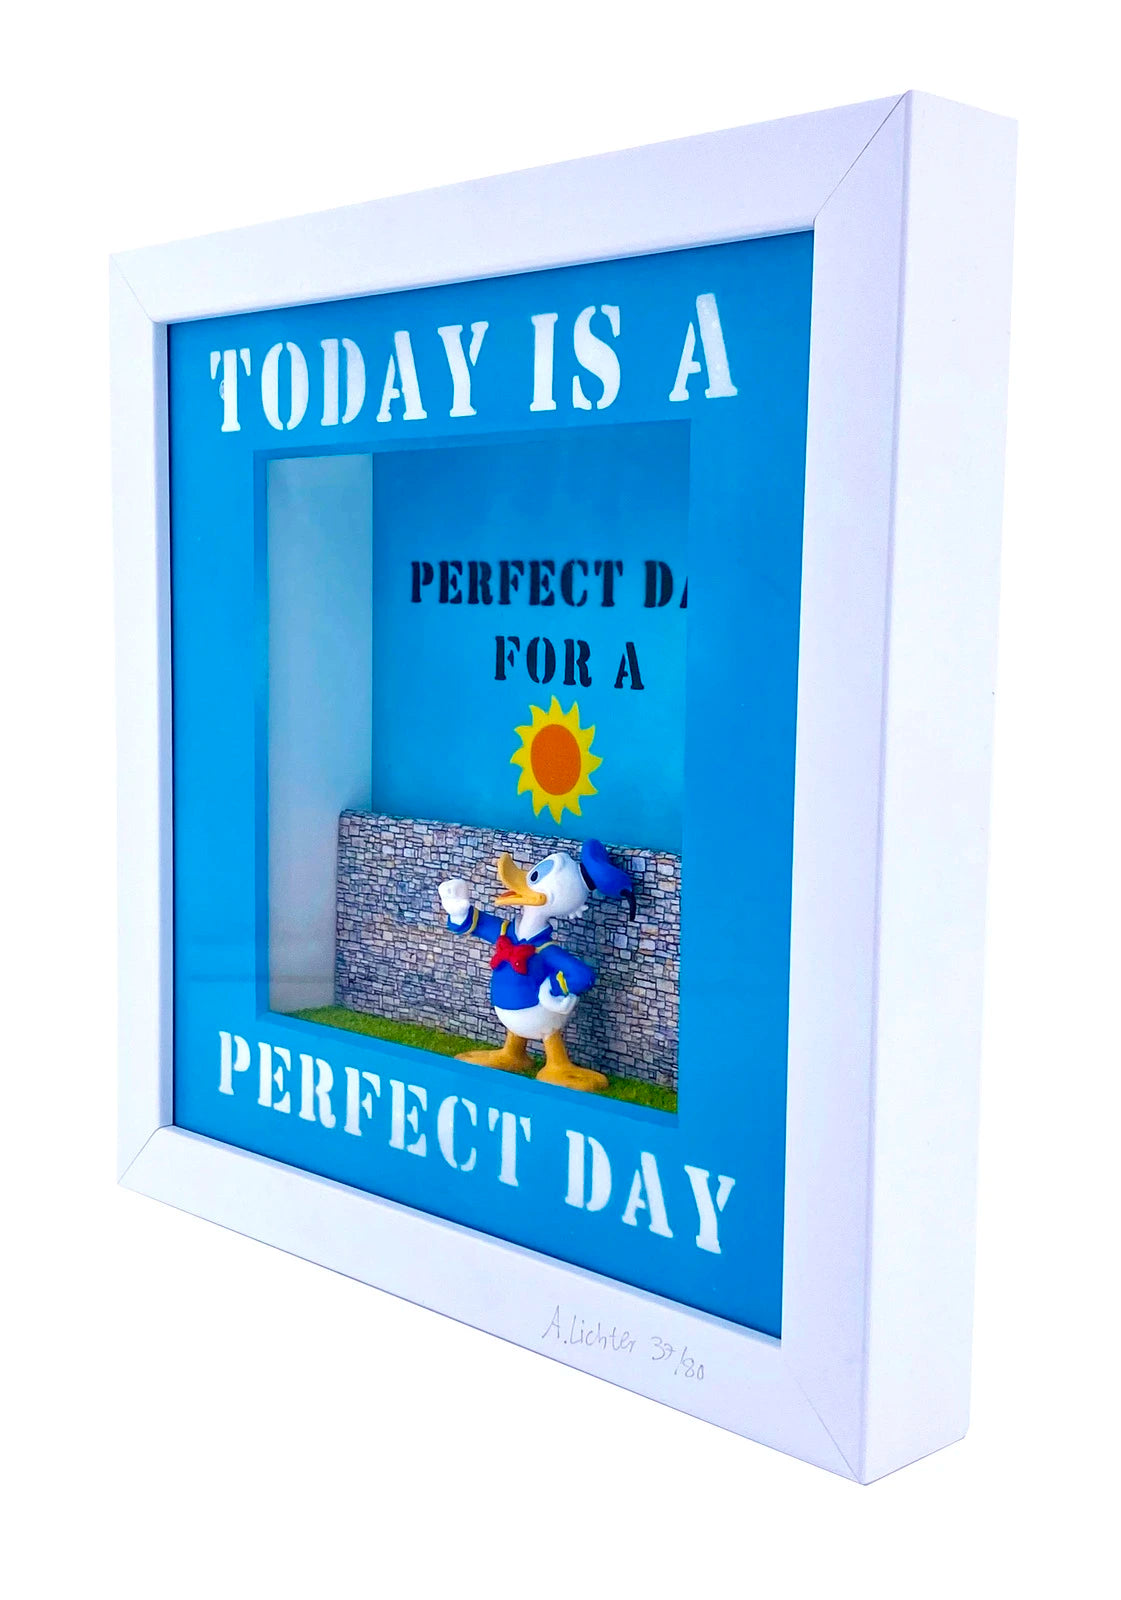 Andreas Lichter - Today is a perfect day Donald Duck - Galerie Vogel